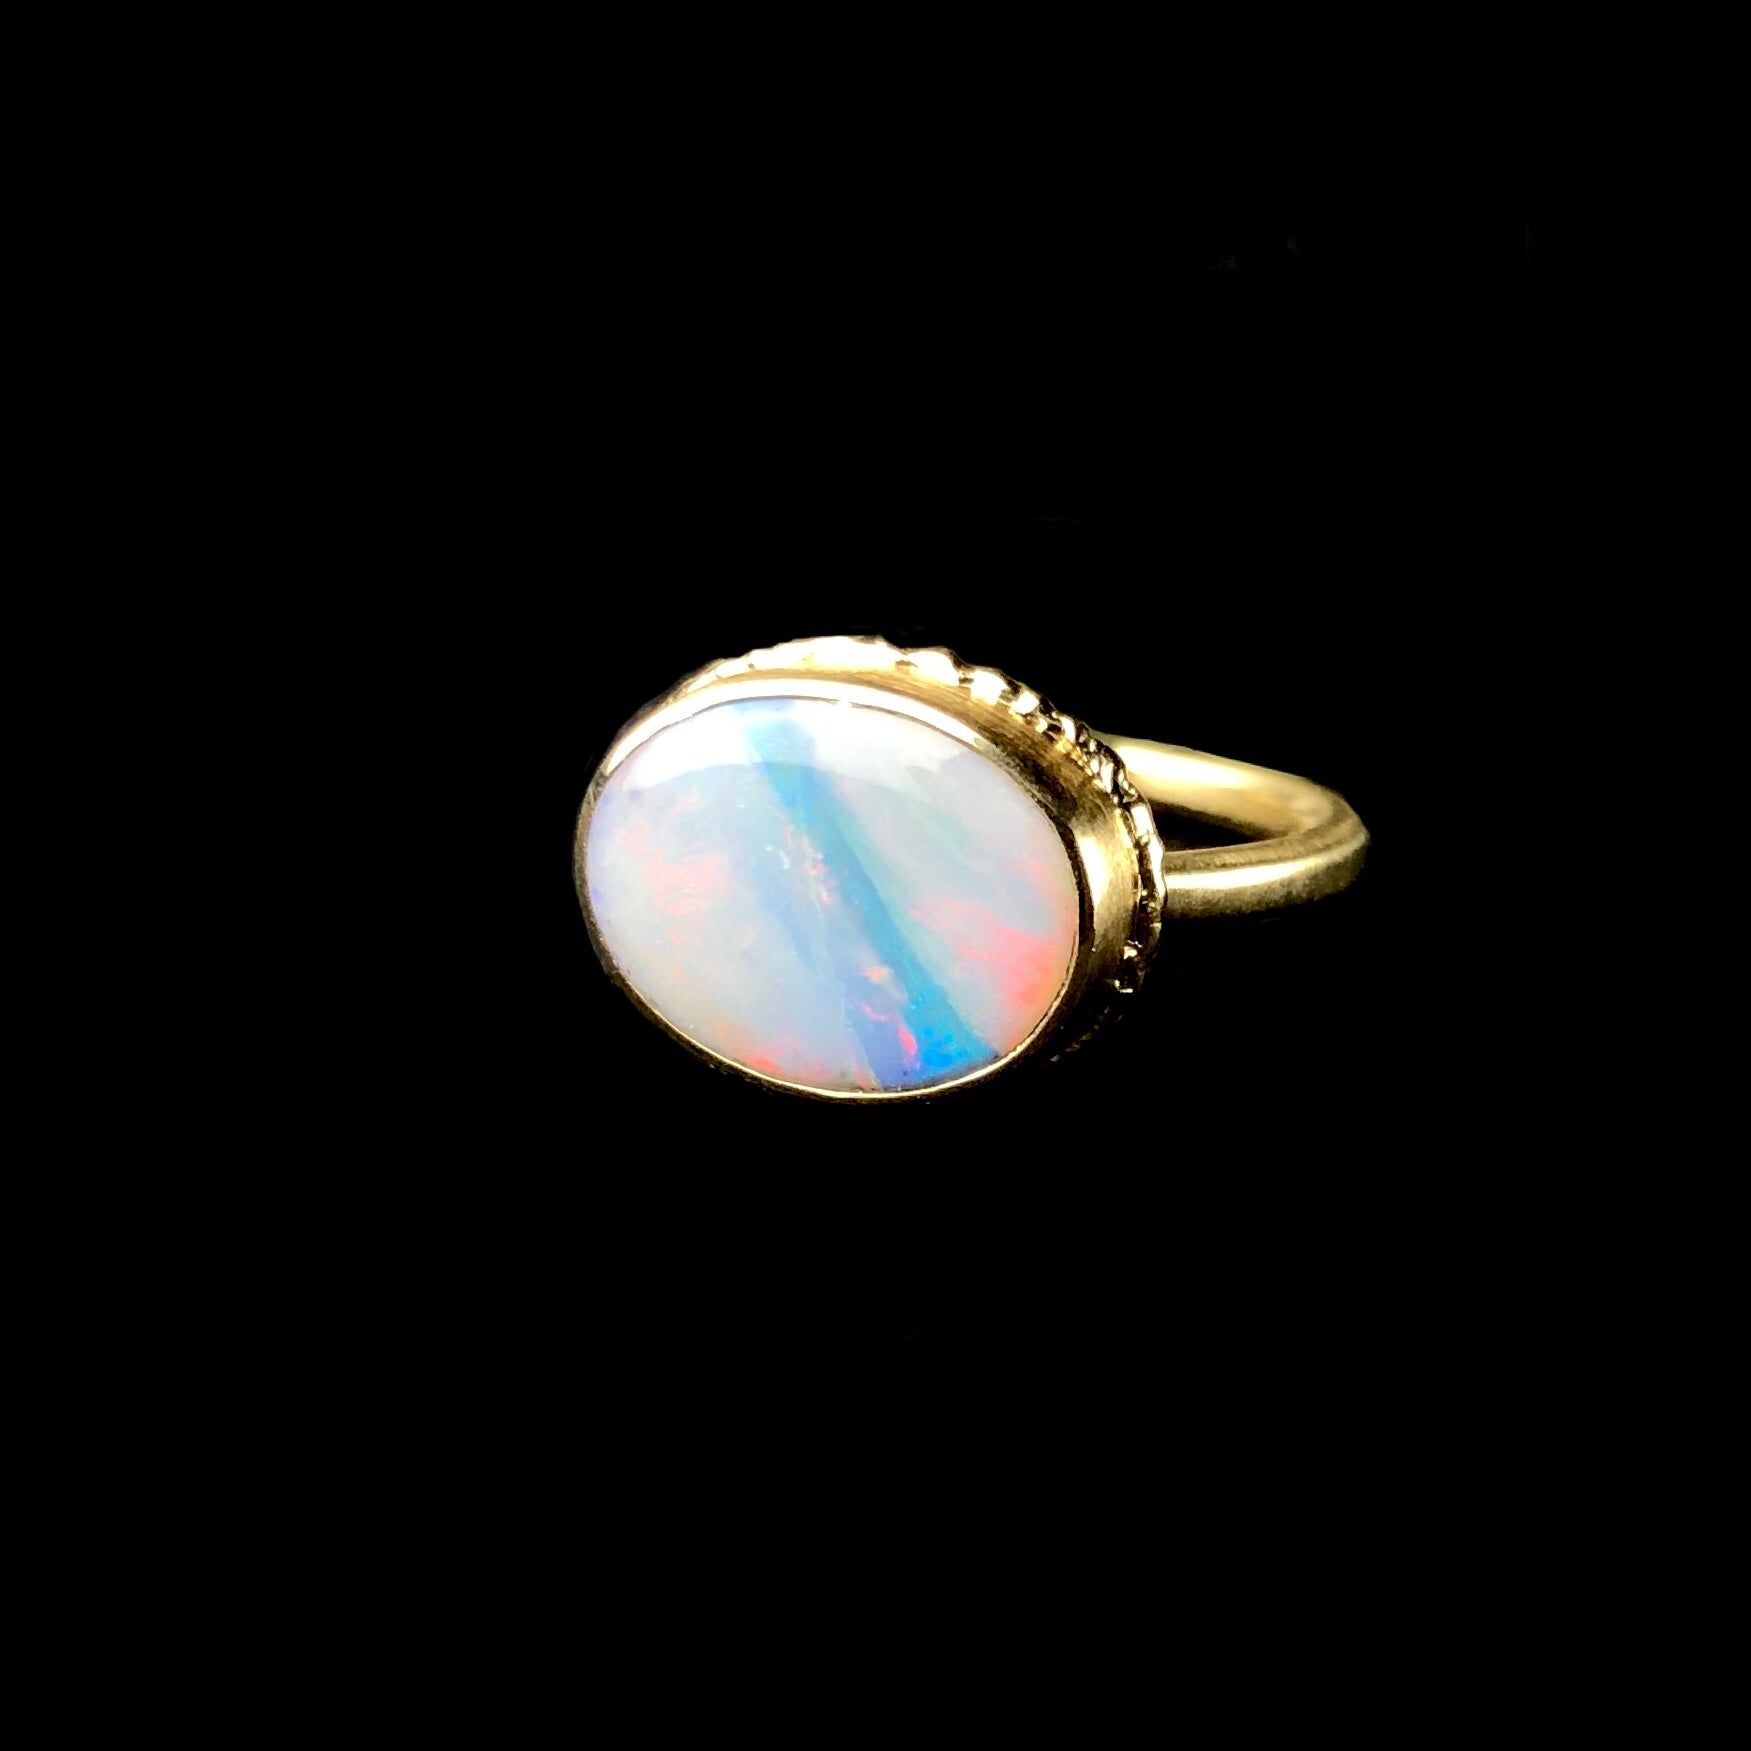 White iridescent opal stone with blue band running diagonally across it set in solid gold ring